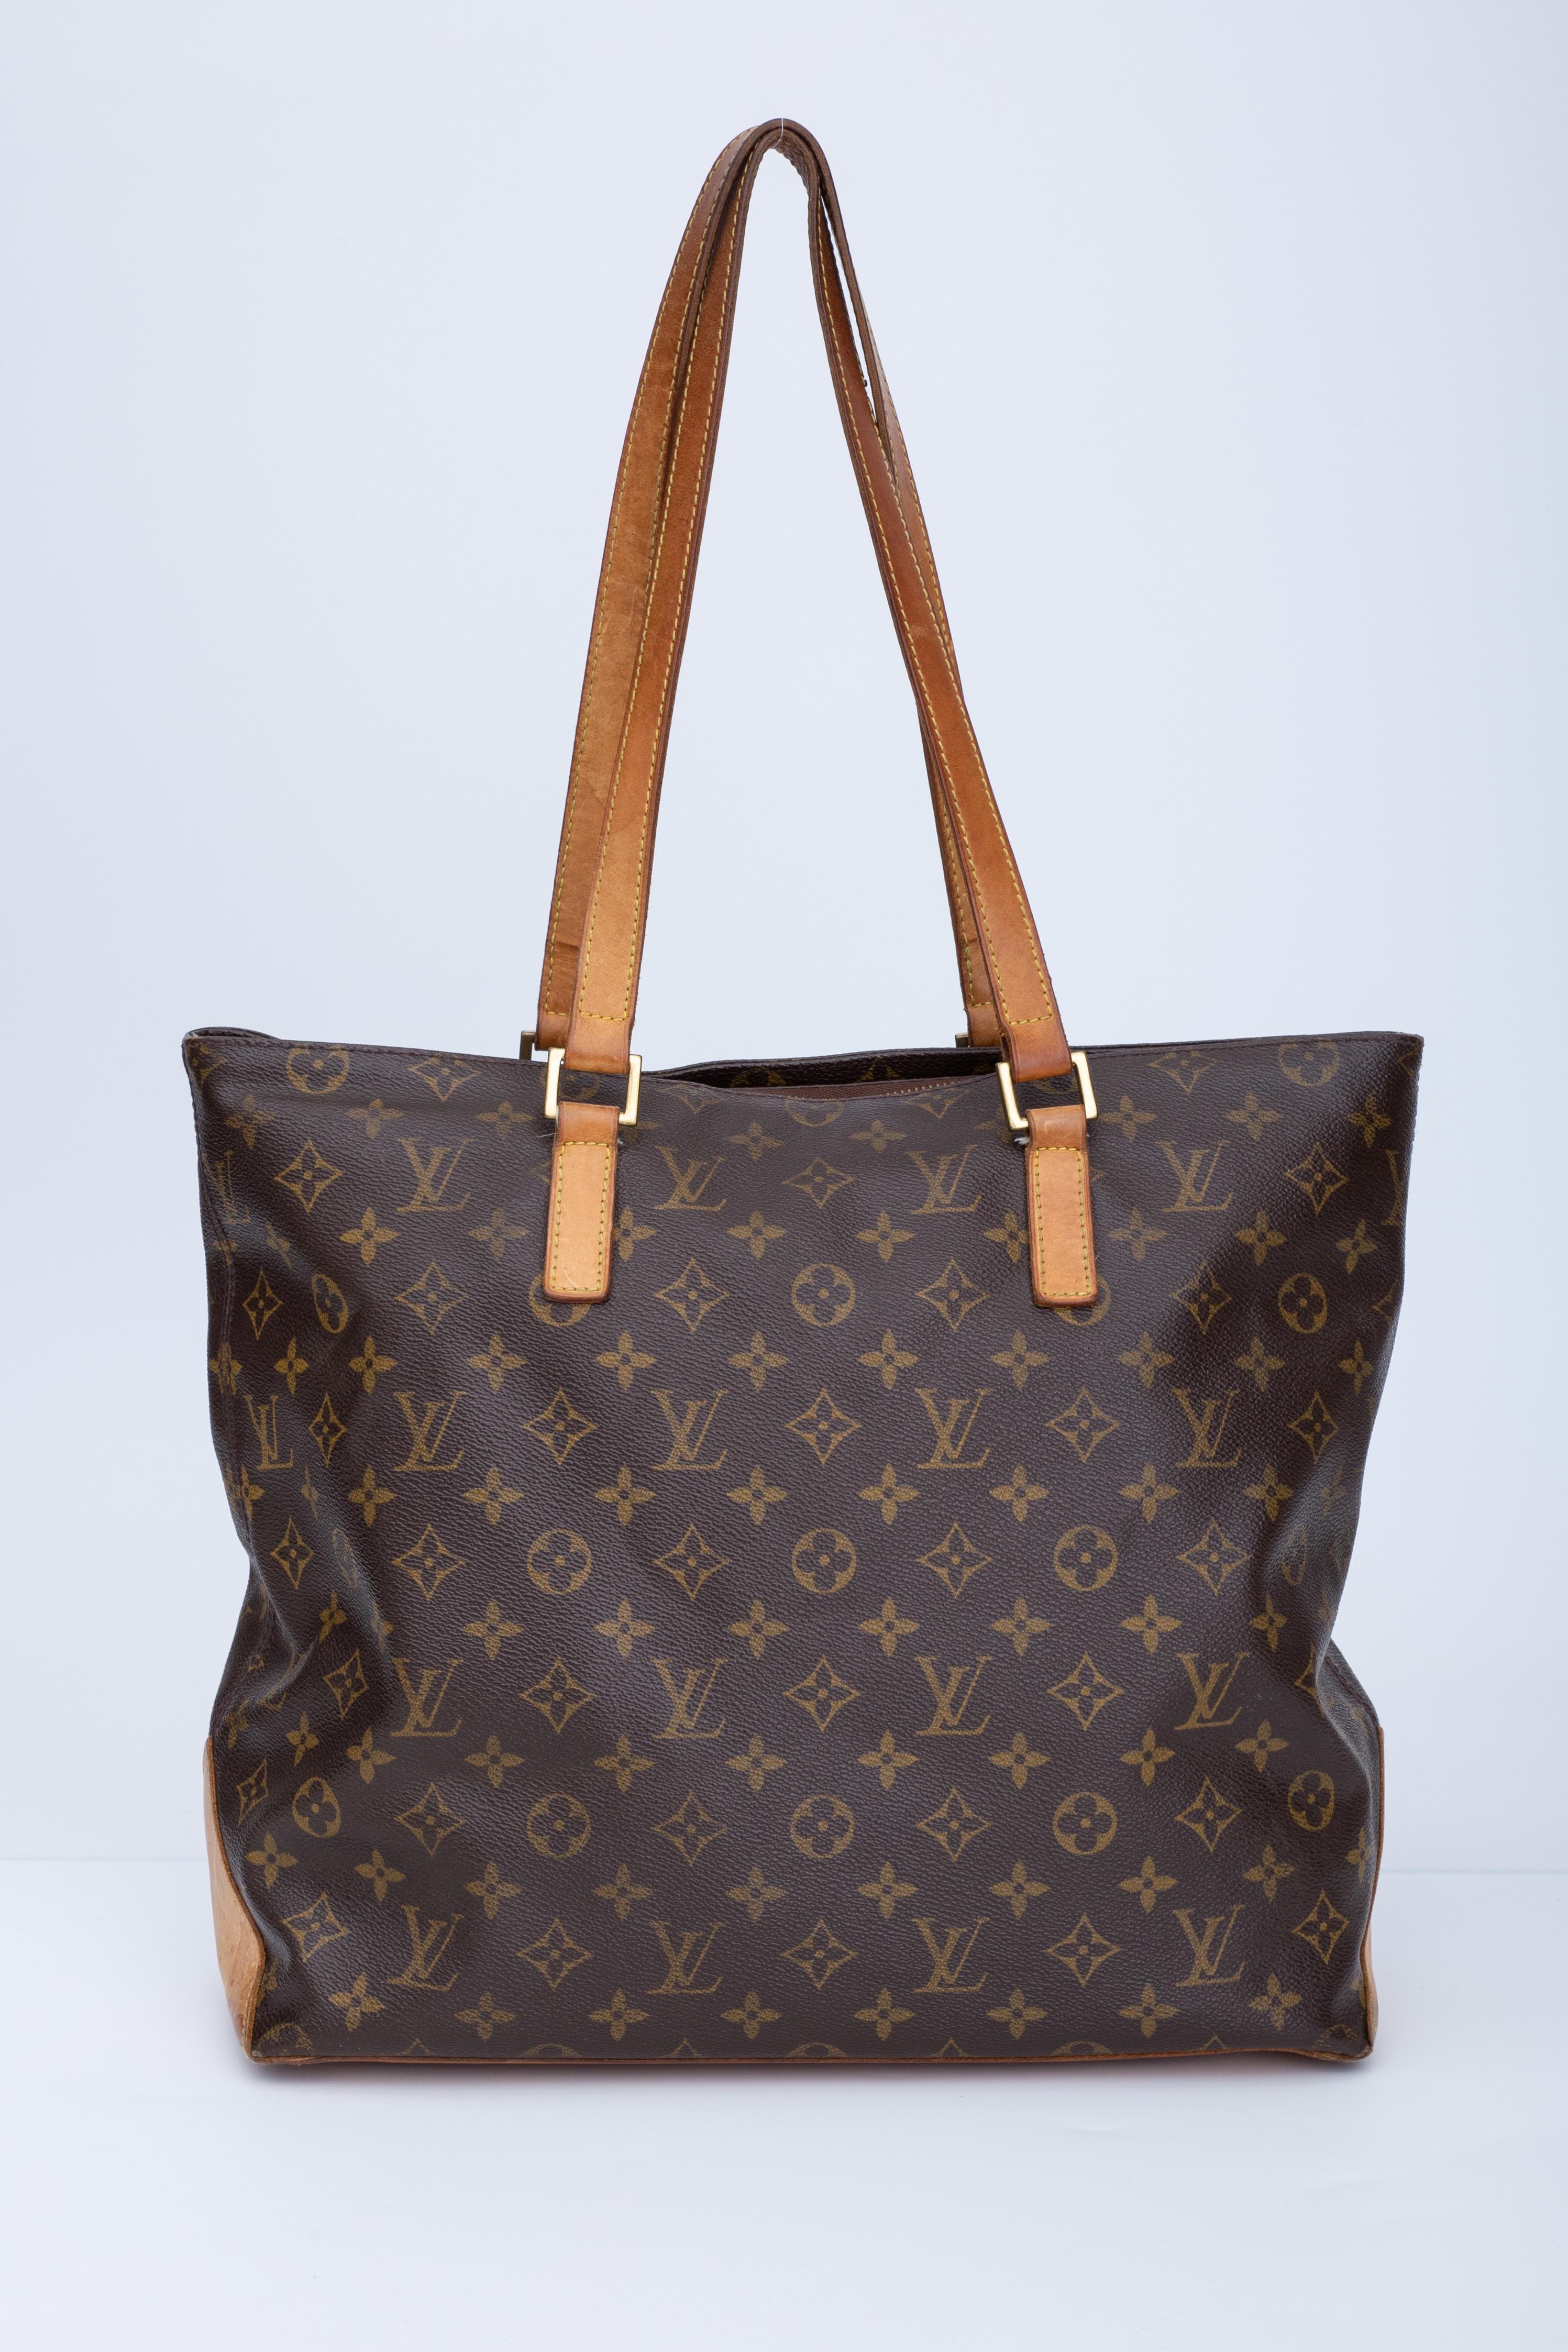 This tote is made of classic Louis Vuitton monogram coated canvas with vachetta leather shoulder straps, a matching base, and polished brass hardware. The top zipper opens the bag to a cocoa brown fabric interior with pockets.

COLOR: